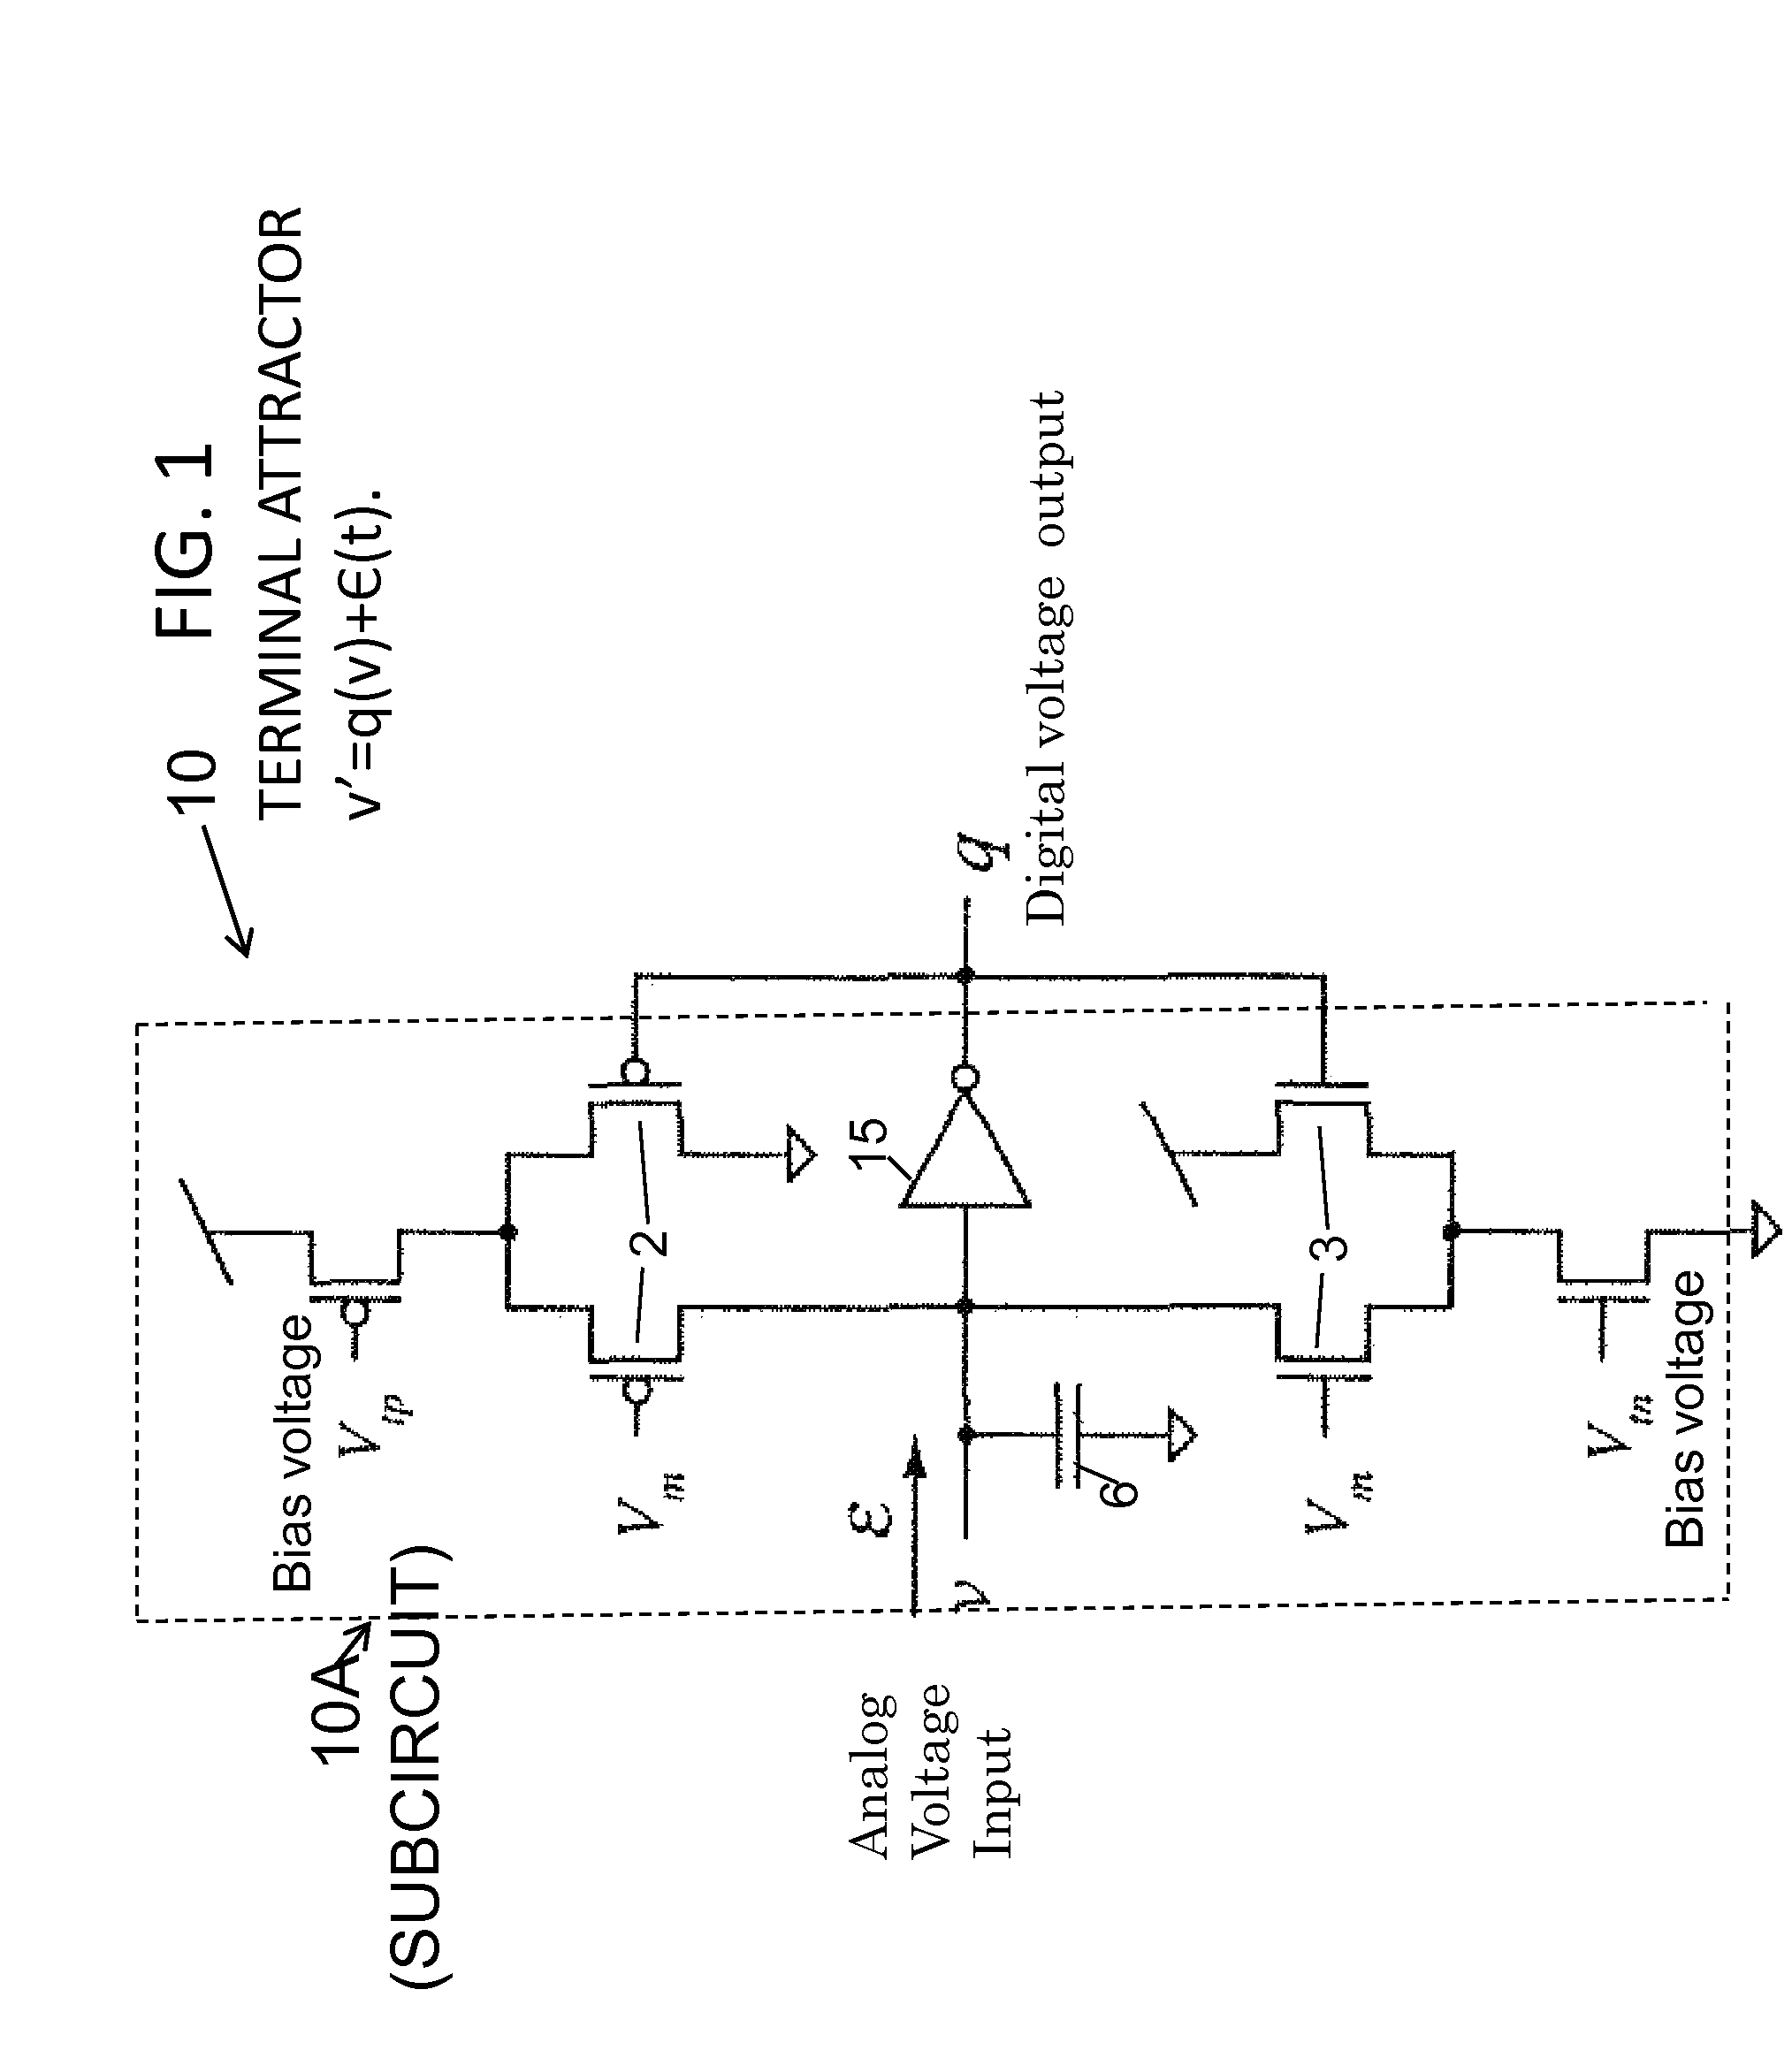 Apparatus and method for using analog circuits to embody non-lipschitz mathematics and properties using attractor and repulsion modes